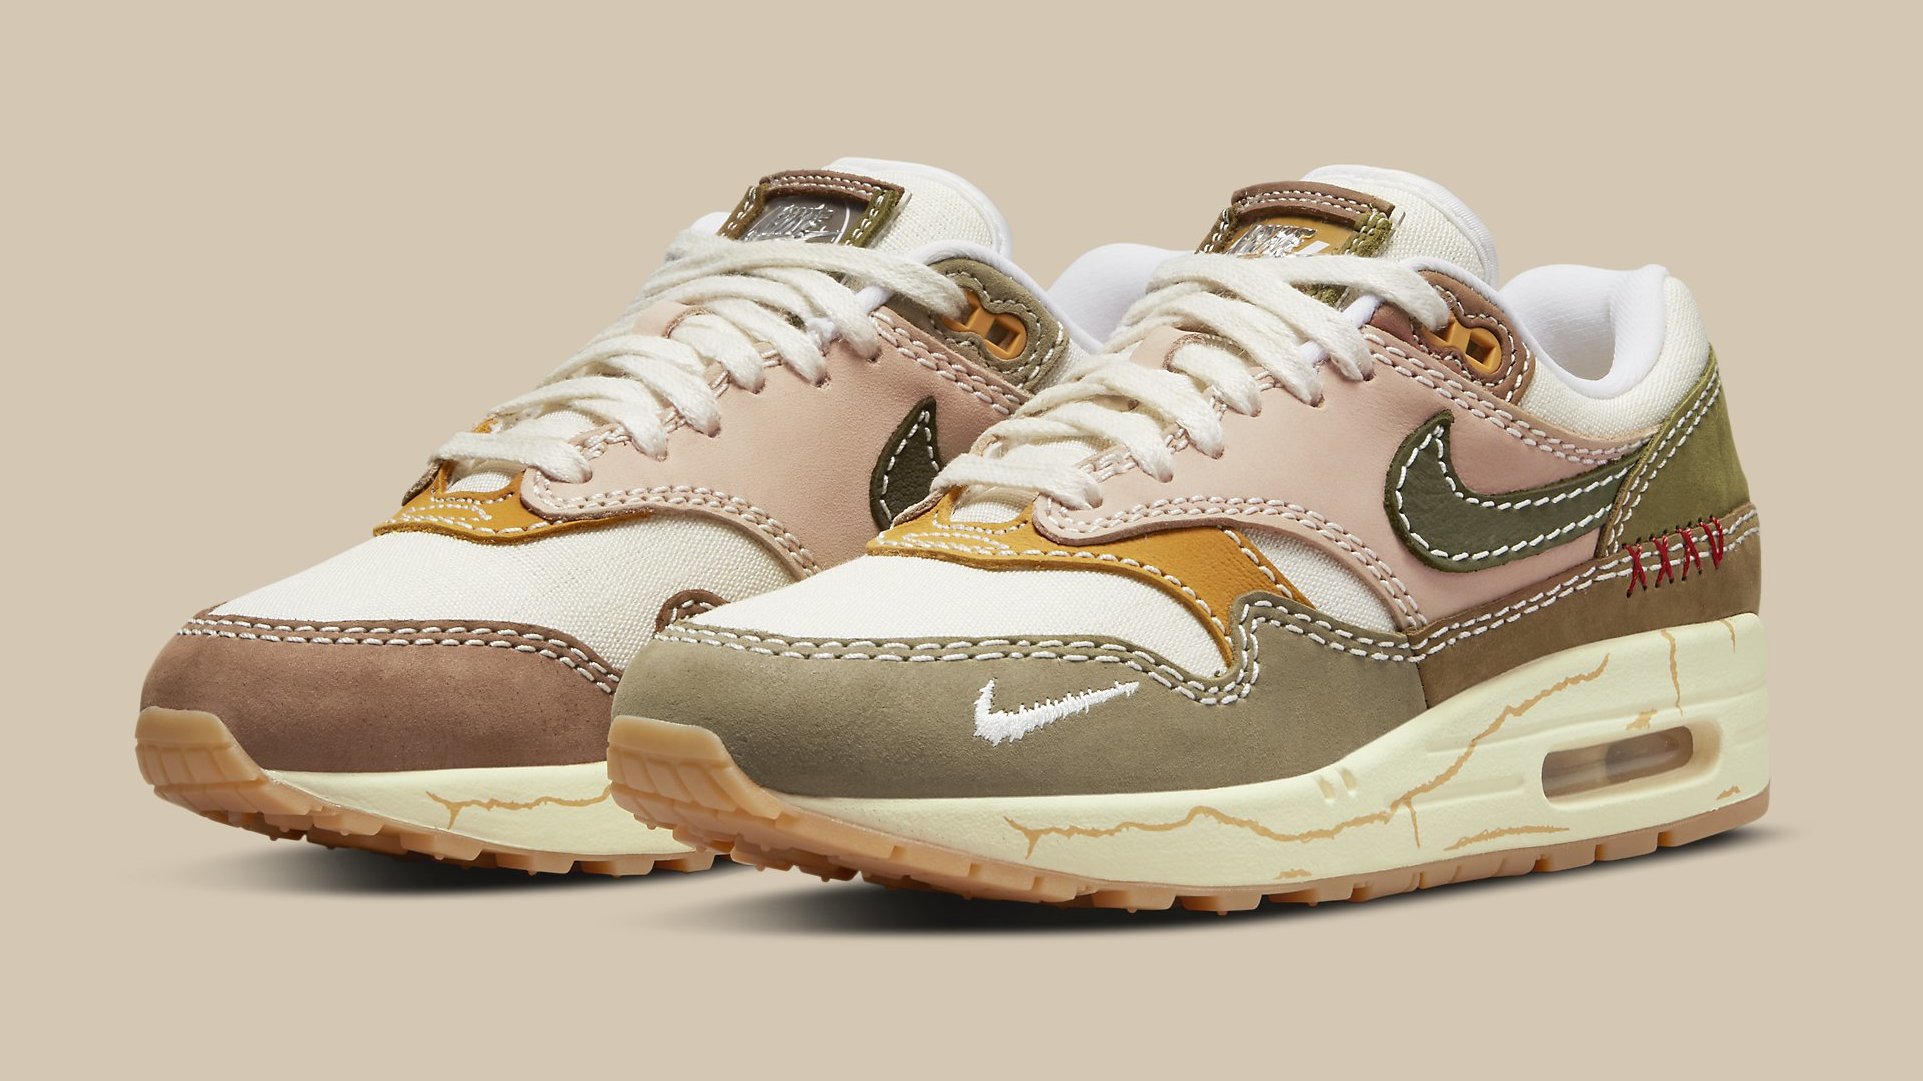 Wabi-sabi' Nike Air Max 1 Releasing Exclusively in Asia-Pacific